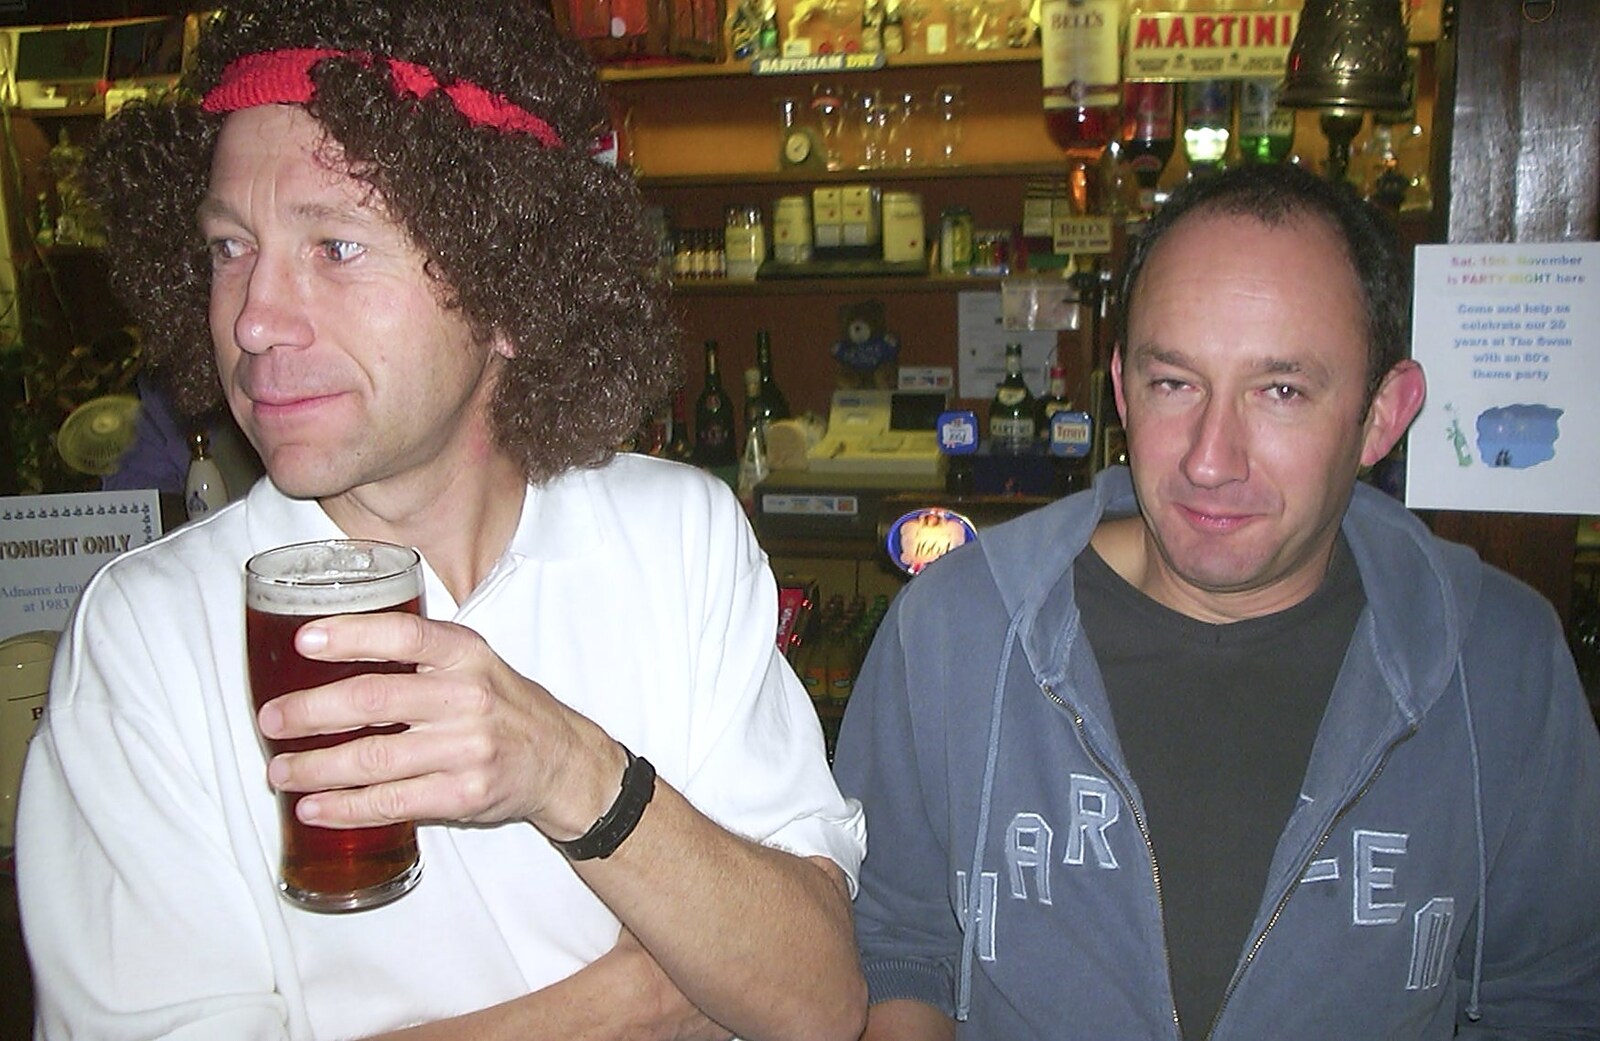 Twenty Years at The Swan Inn, Brome, Suffolk - 15th November 2003: Apple models his 'you cannot be serious' headband